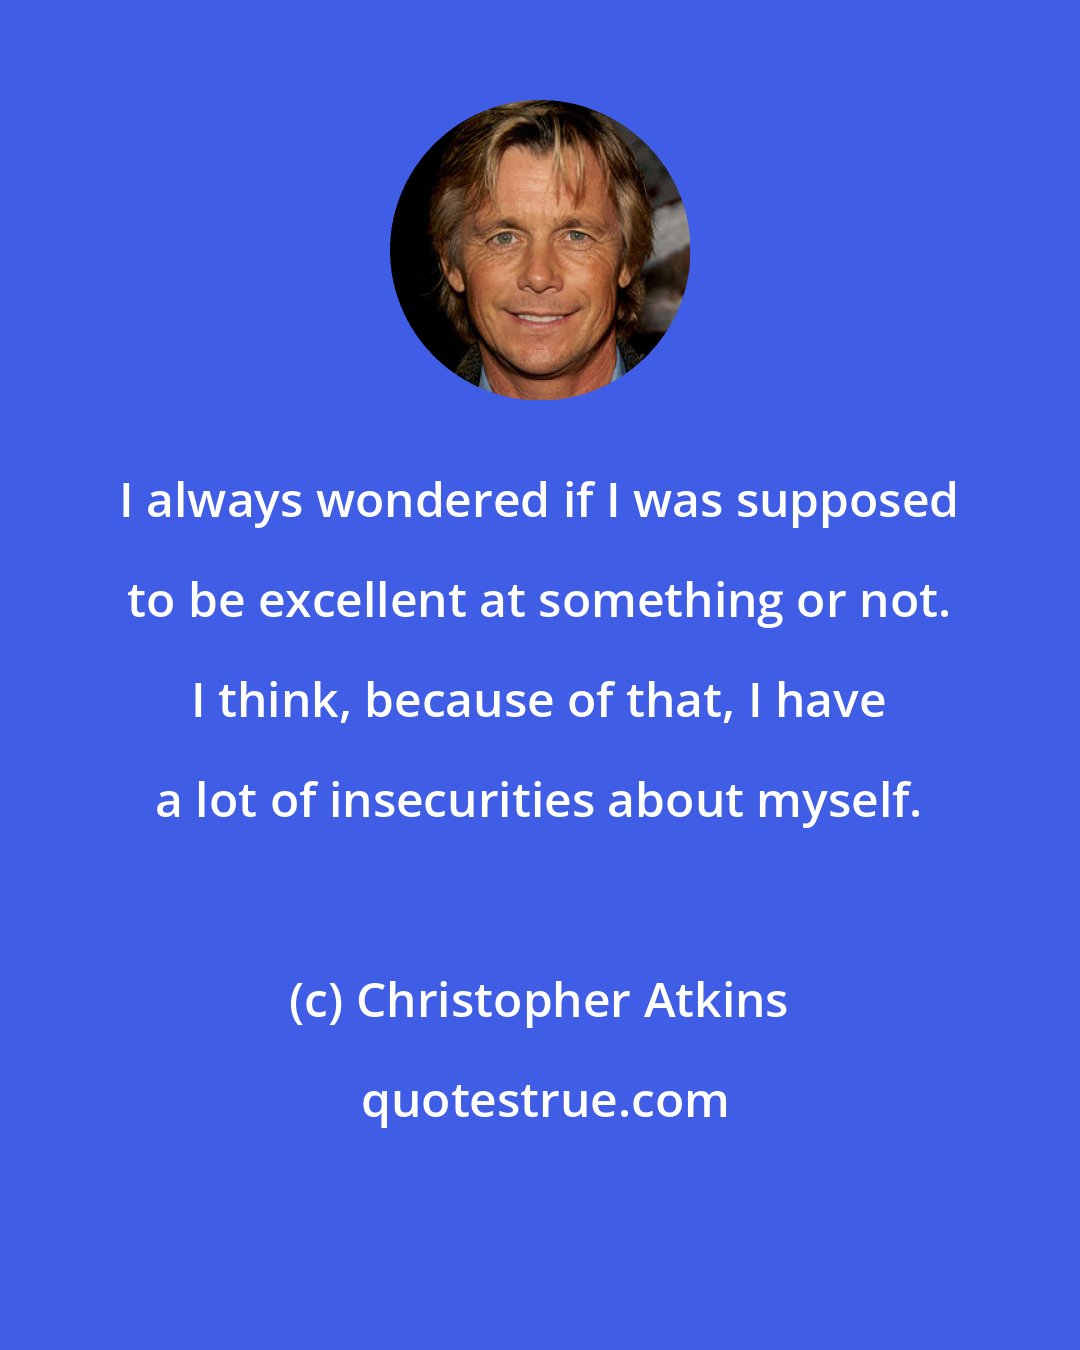 Christopher Atkins: I always wondered if I was supposed to be excellent at something or not. I think, because of that, I have a lot of insecurities about myself.